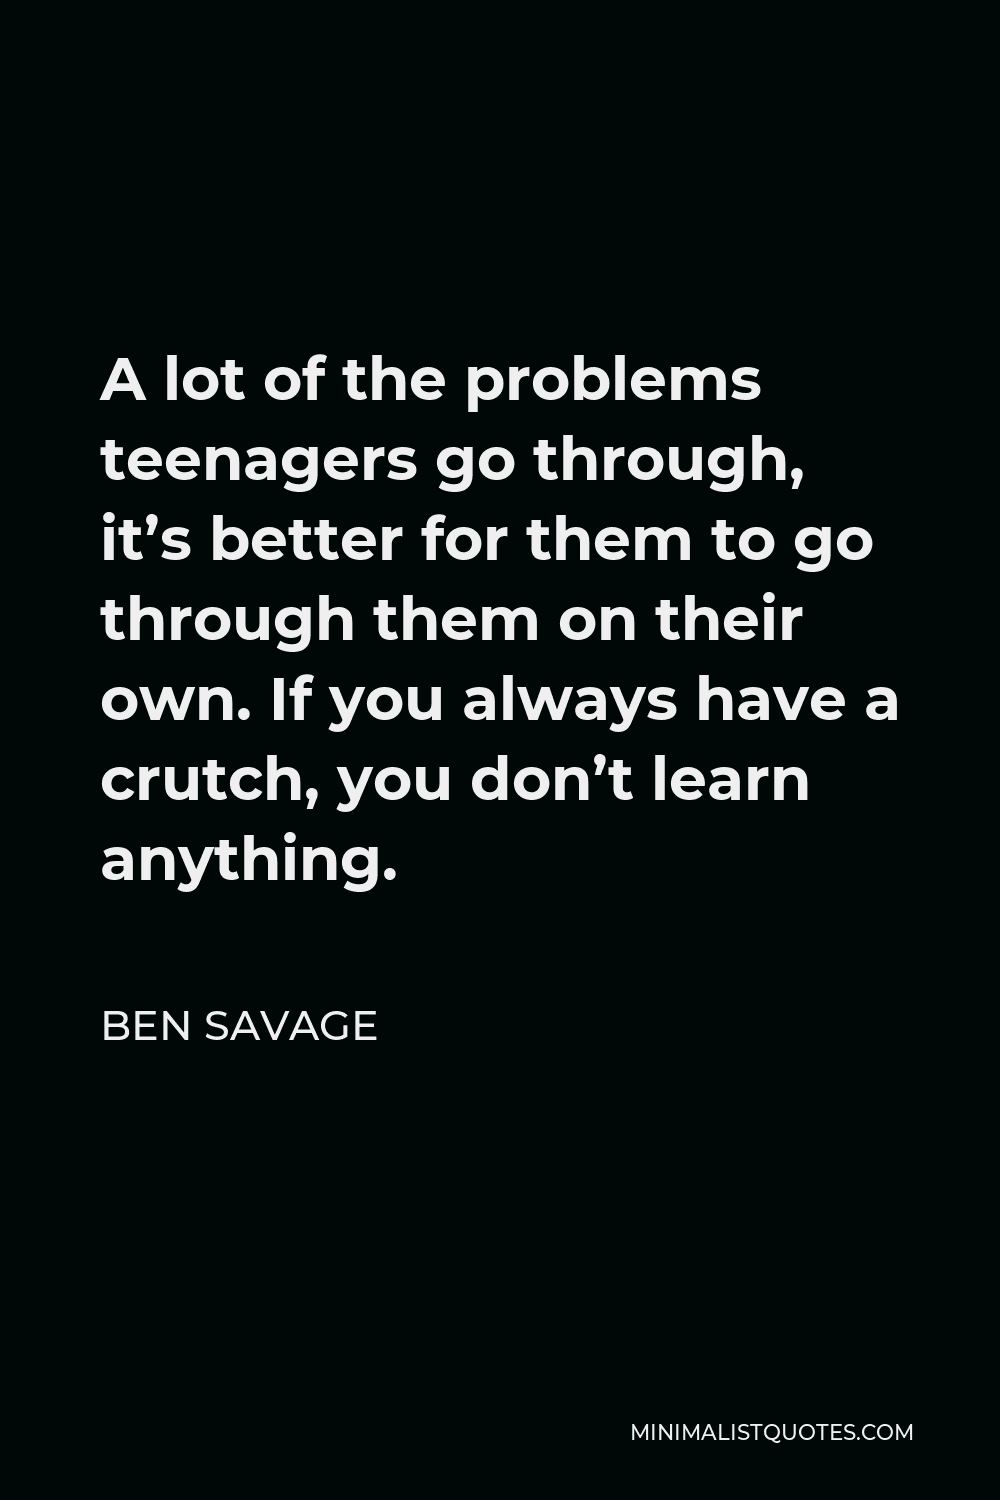 Ben Savage Quote - A lot of the problems teenagers go through, it’s better for them to go through them on their own. If you always have a crutch, you don’t learn anything.